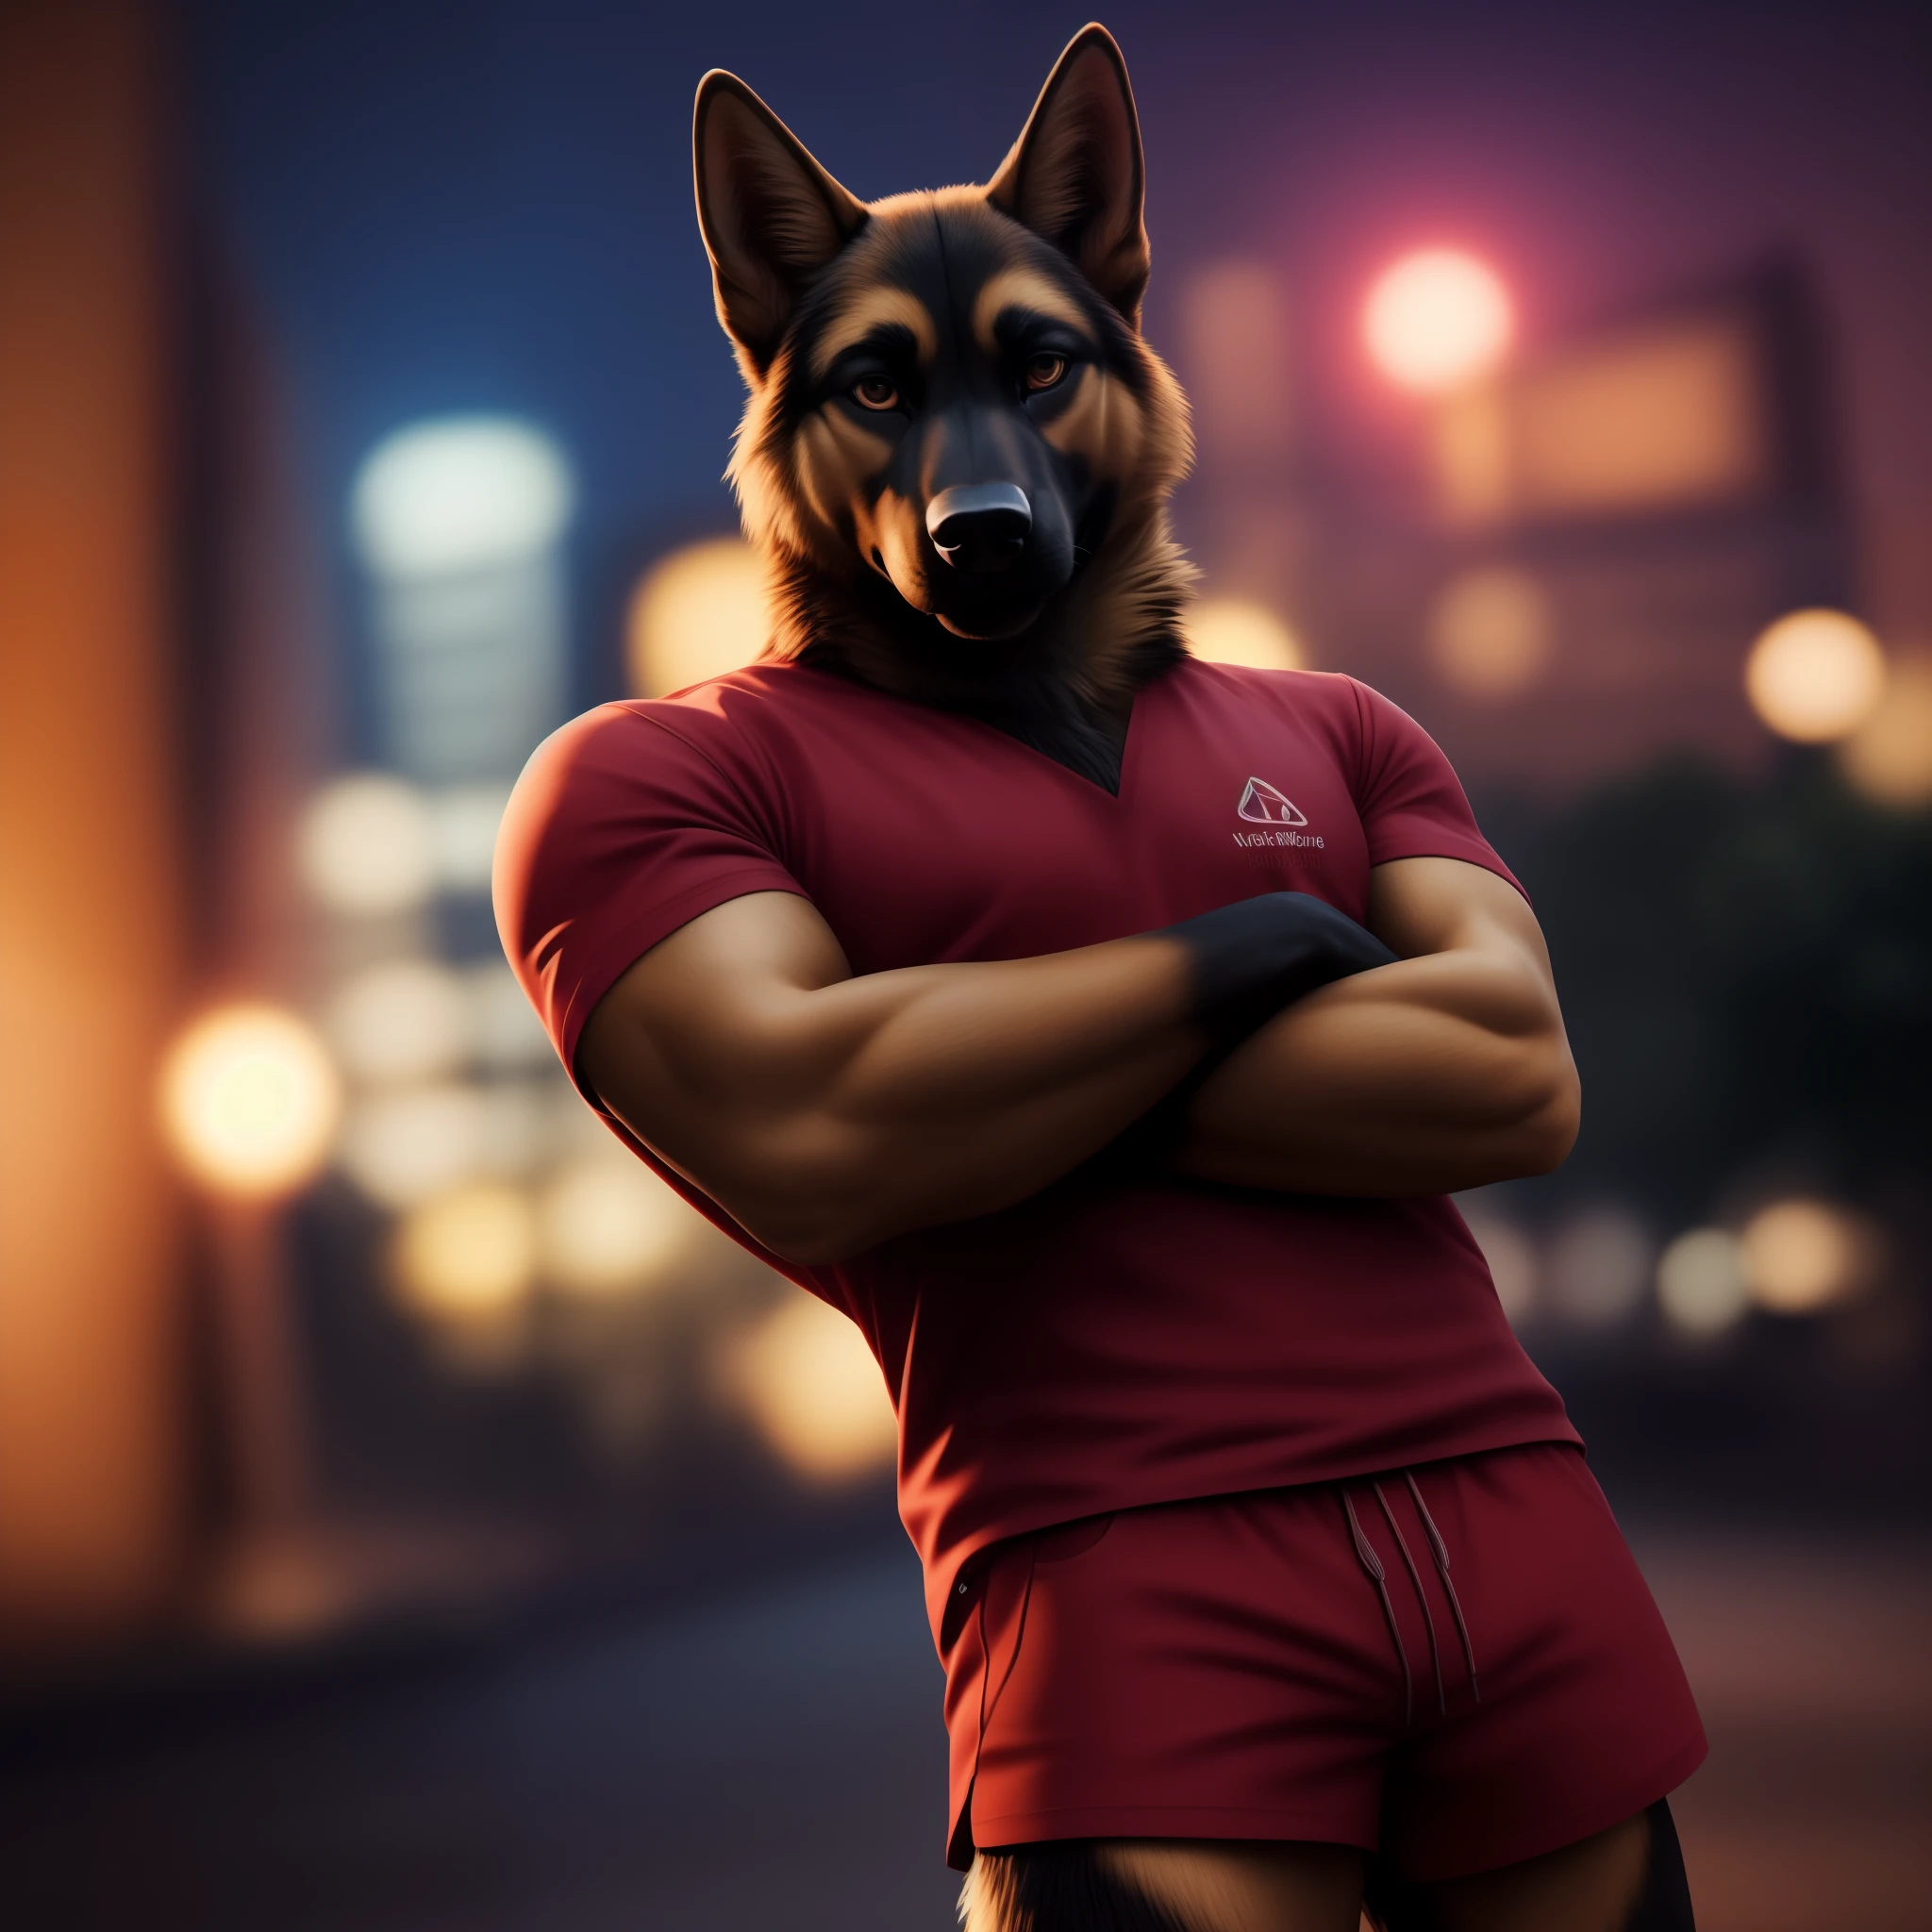 A German Shepherd Wolf with Crossed Arms Ultra Realistic 8k Wearing a Red Shirt A Red Shorts Night Background Blurred Background 30 years old 3D texture young adult with Playstation 5 graphics Very sensational pose and looking at the camera